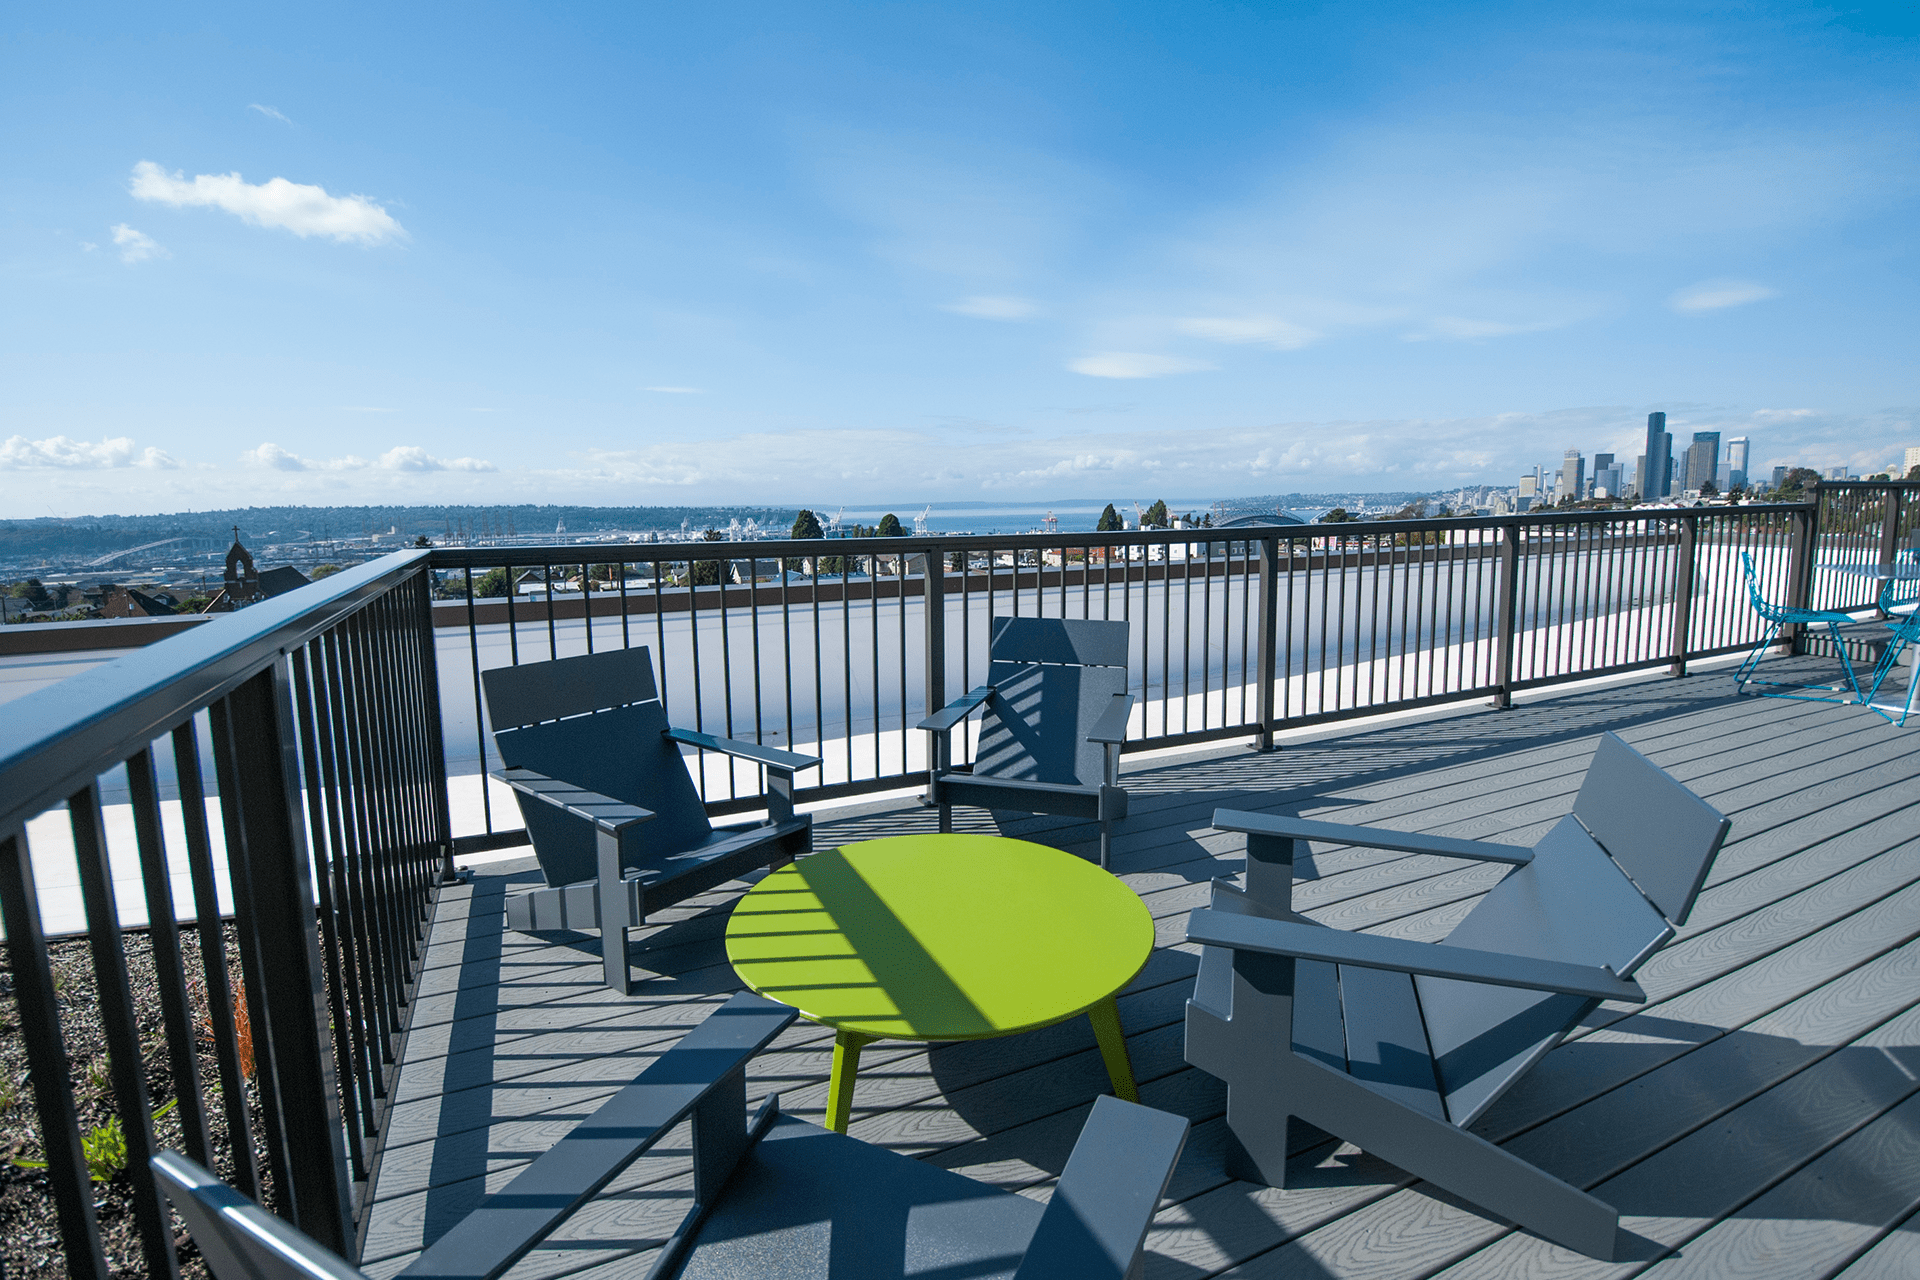 The communal space at the top of the McClellan building has several seating areas and a view of Seattle and surrounding water.